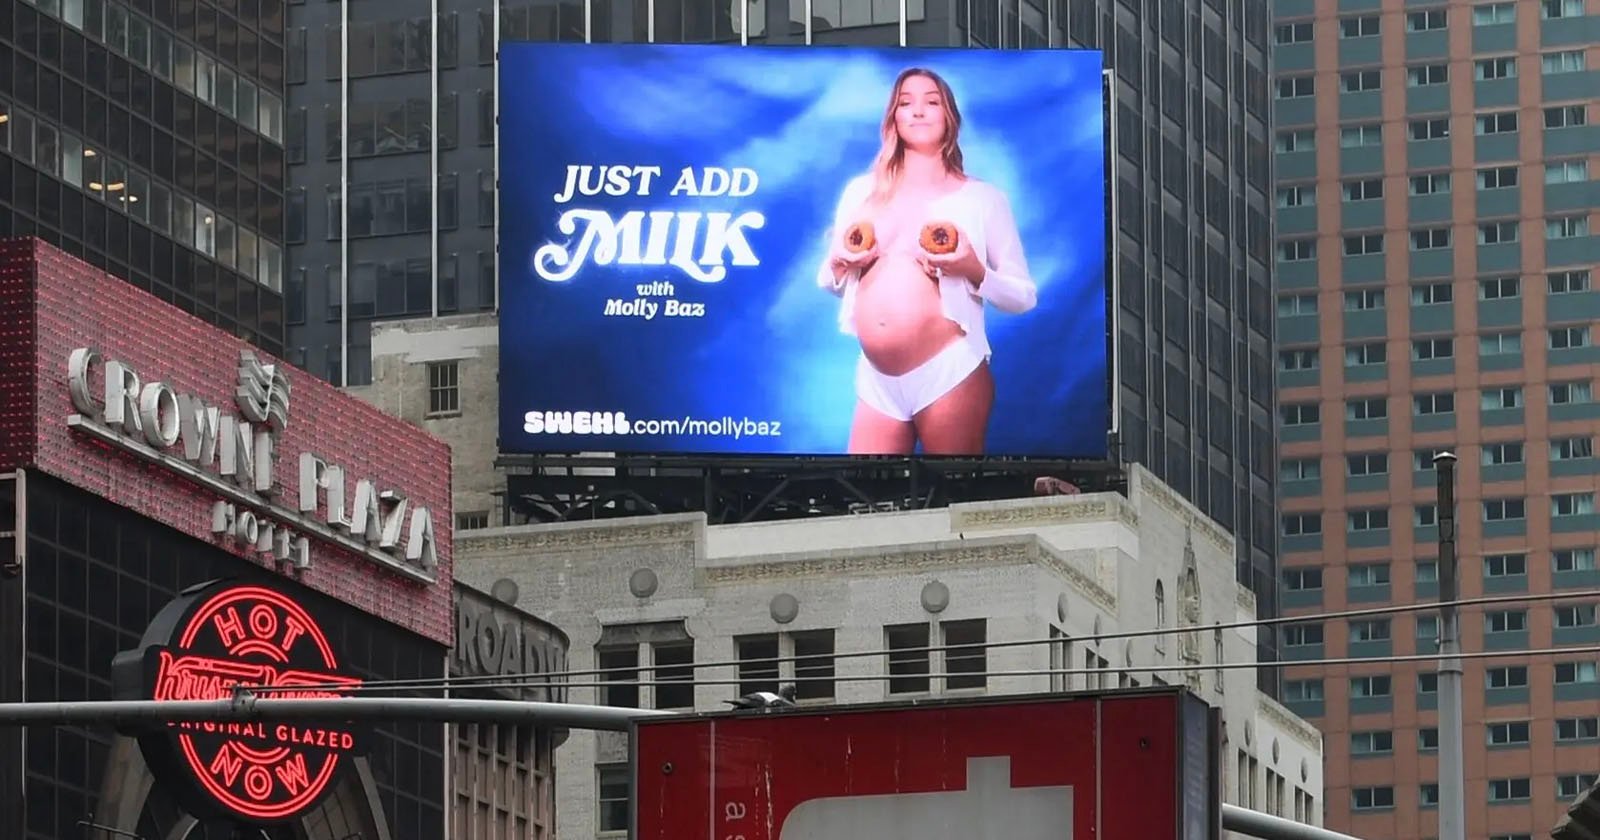 ‘Inappropriate’ Photo of Pregnant Woman is Pulled From Times Square